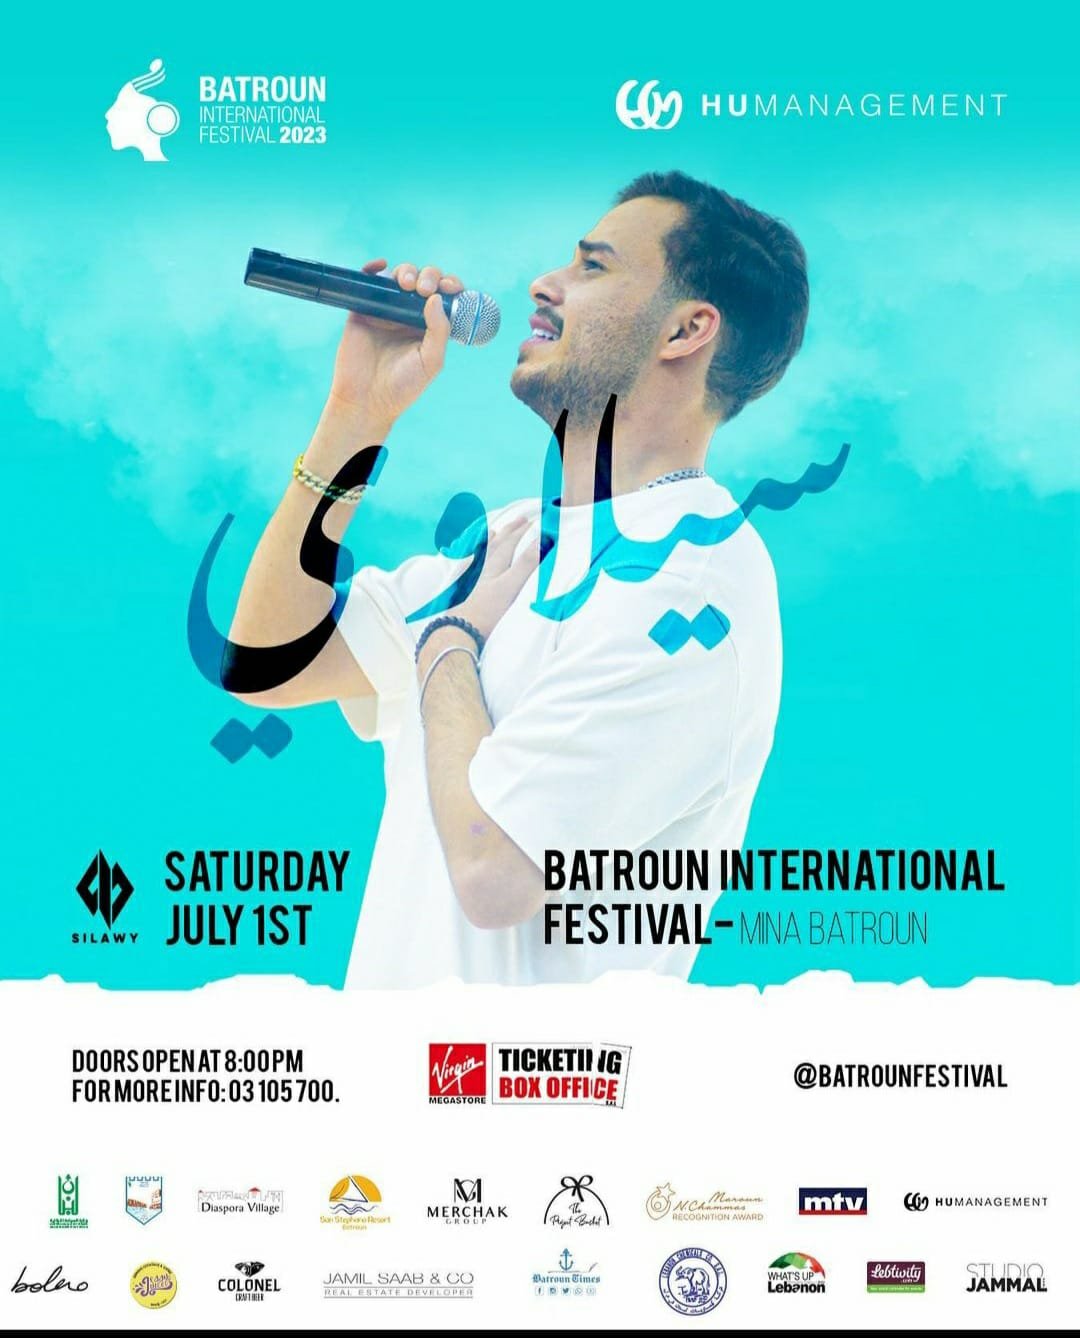 Siilawy in concert at the Batroun International Festival